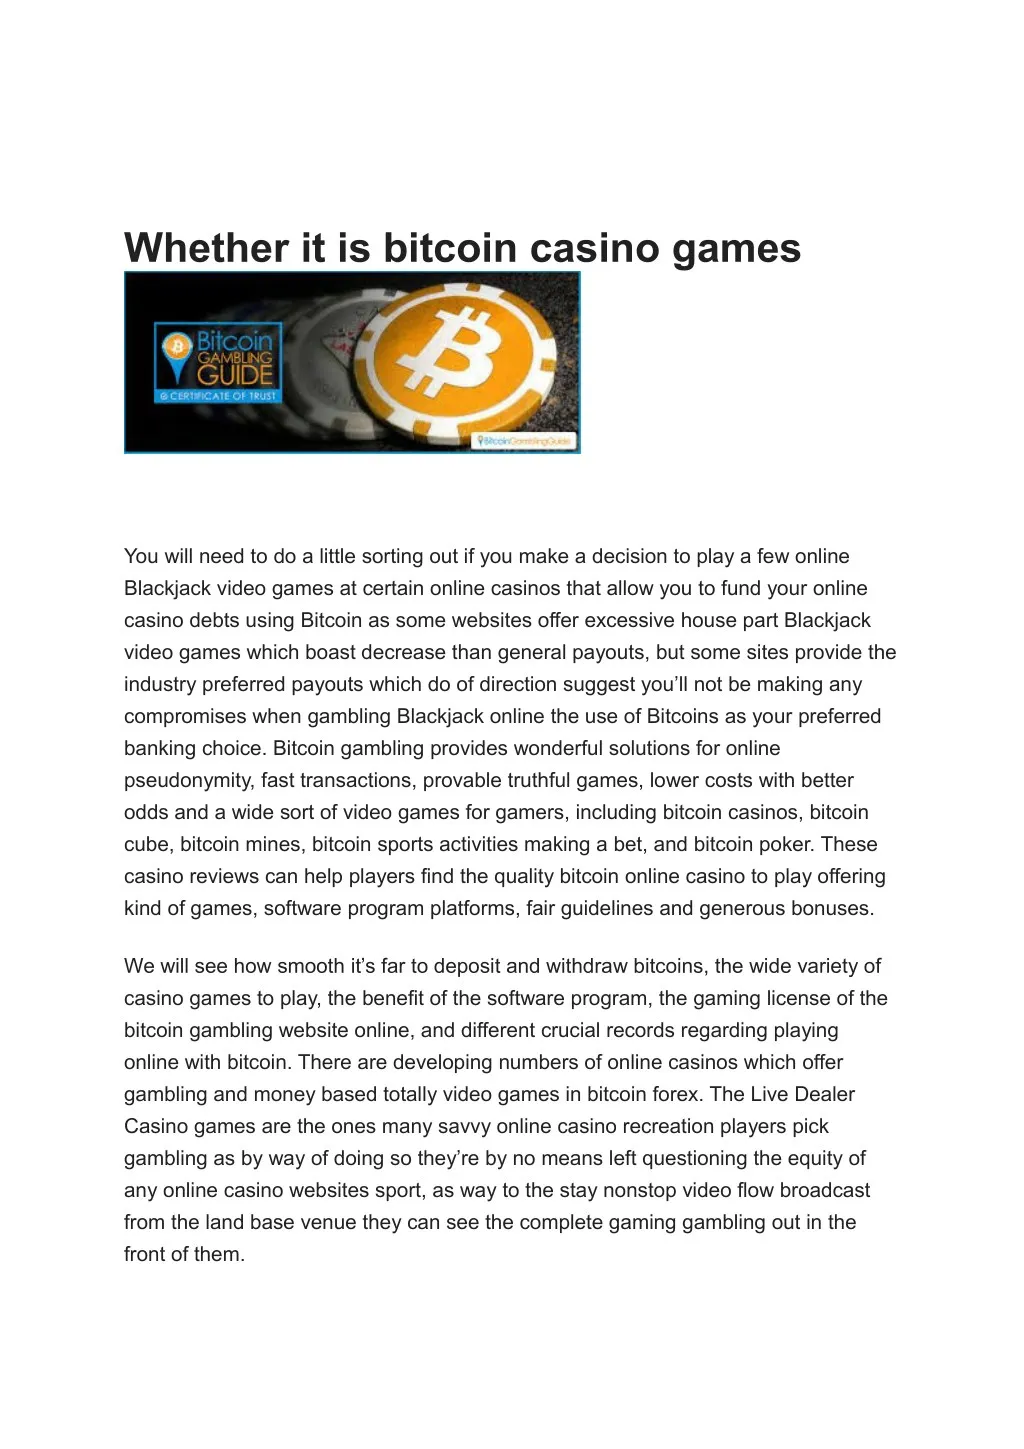 whether it is bitcoin casino games